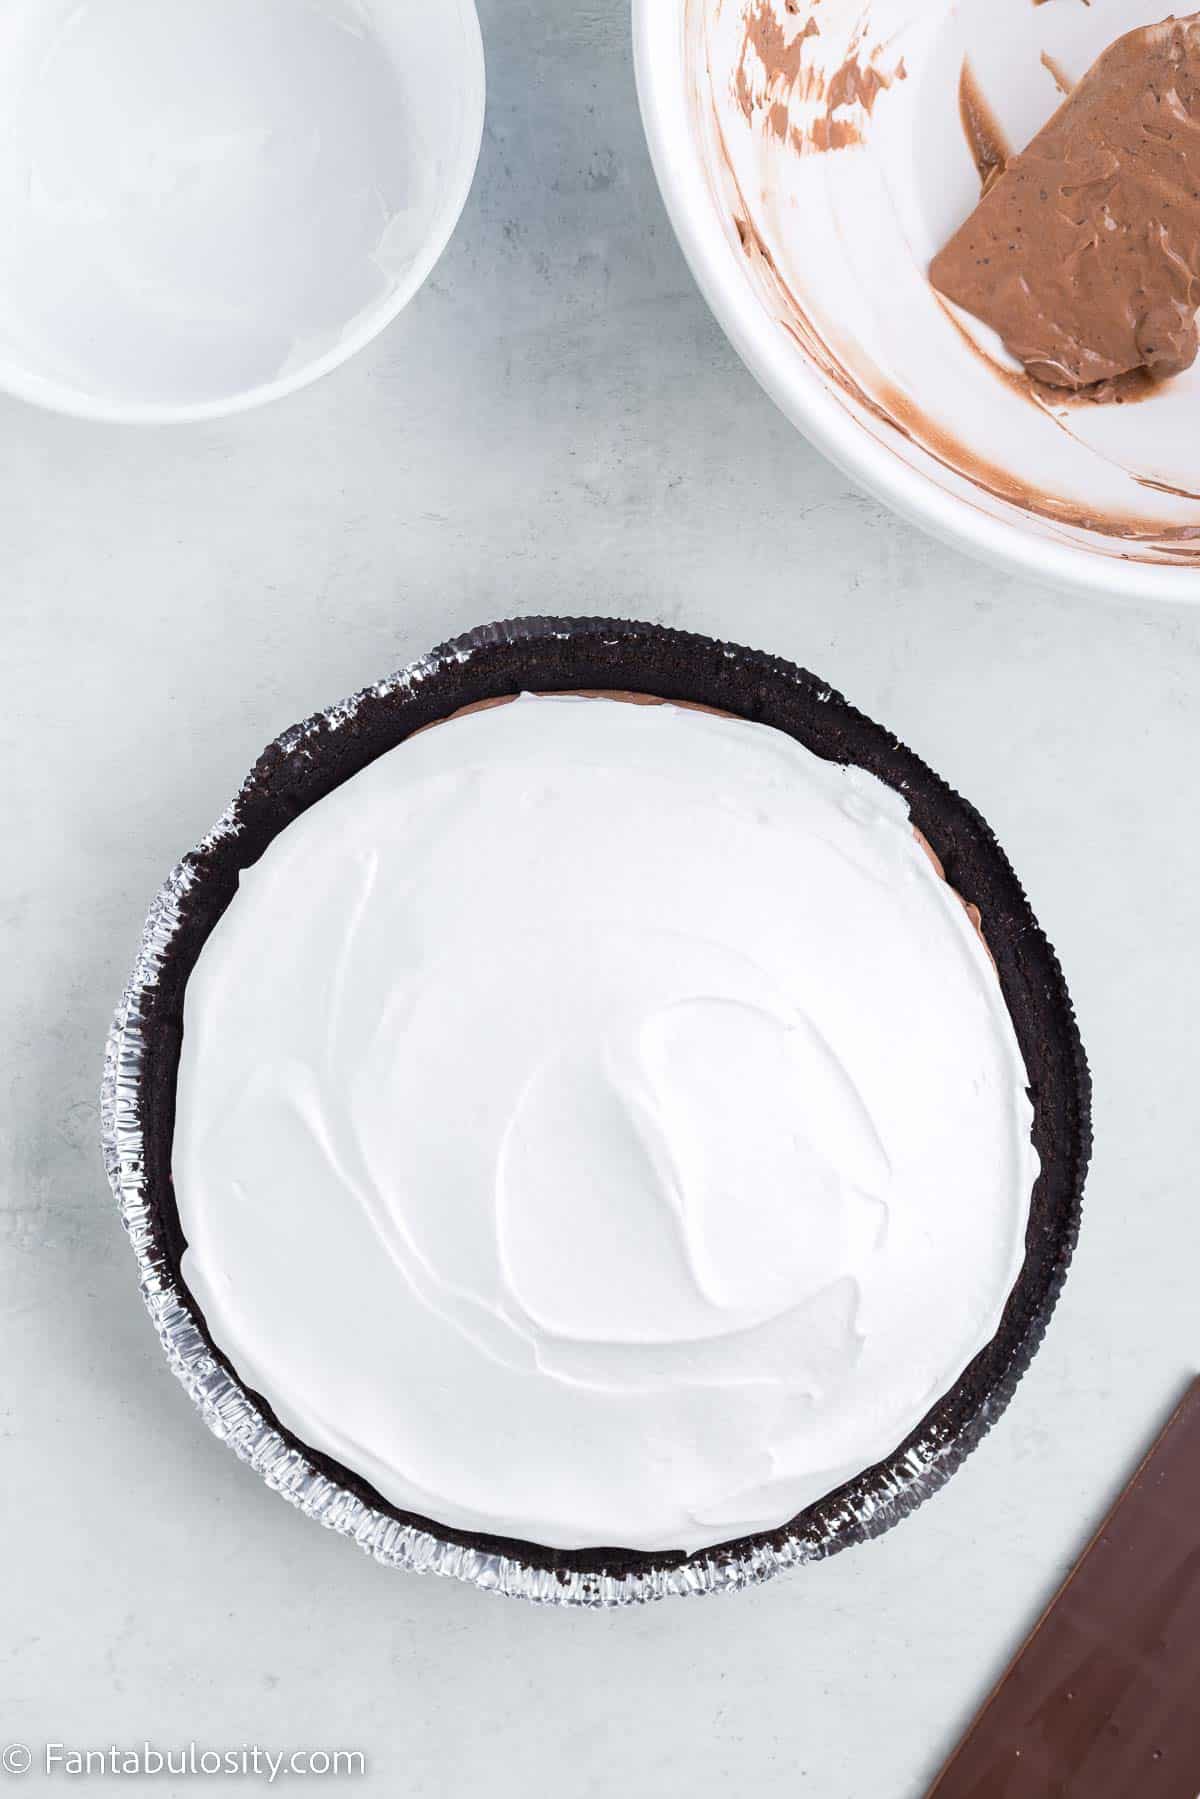 Cool Whip topping on top of chocolate pie.